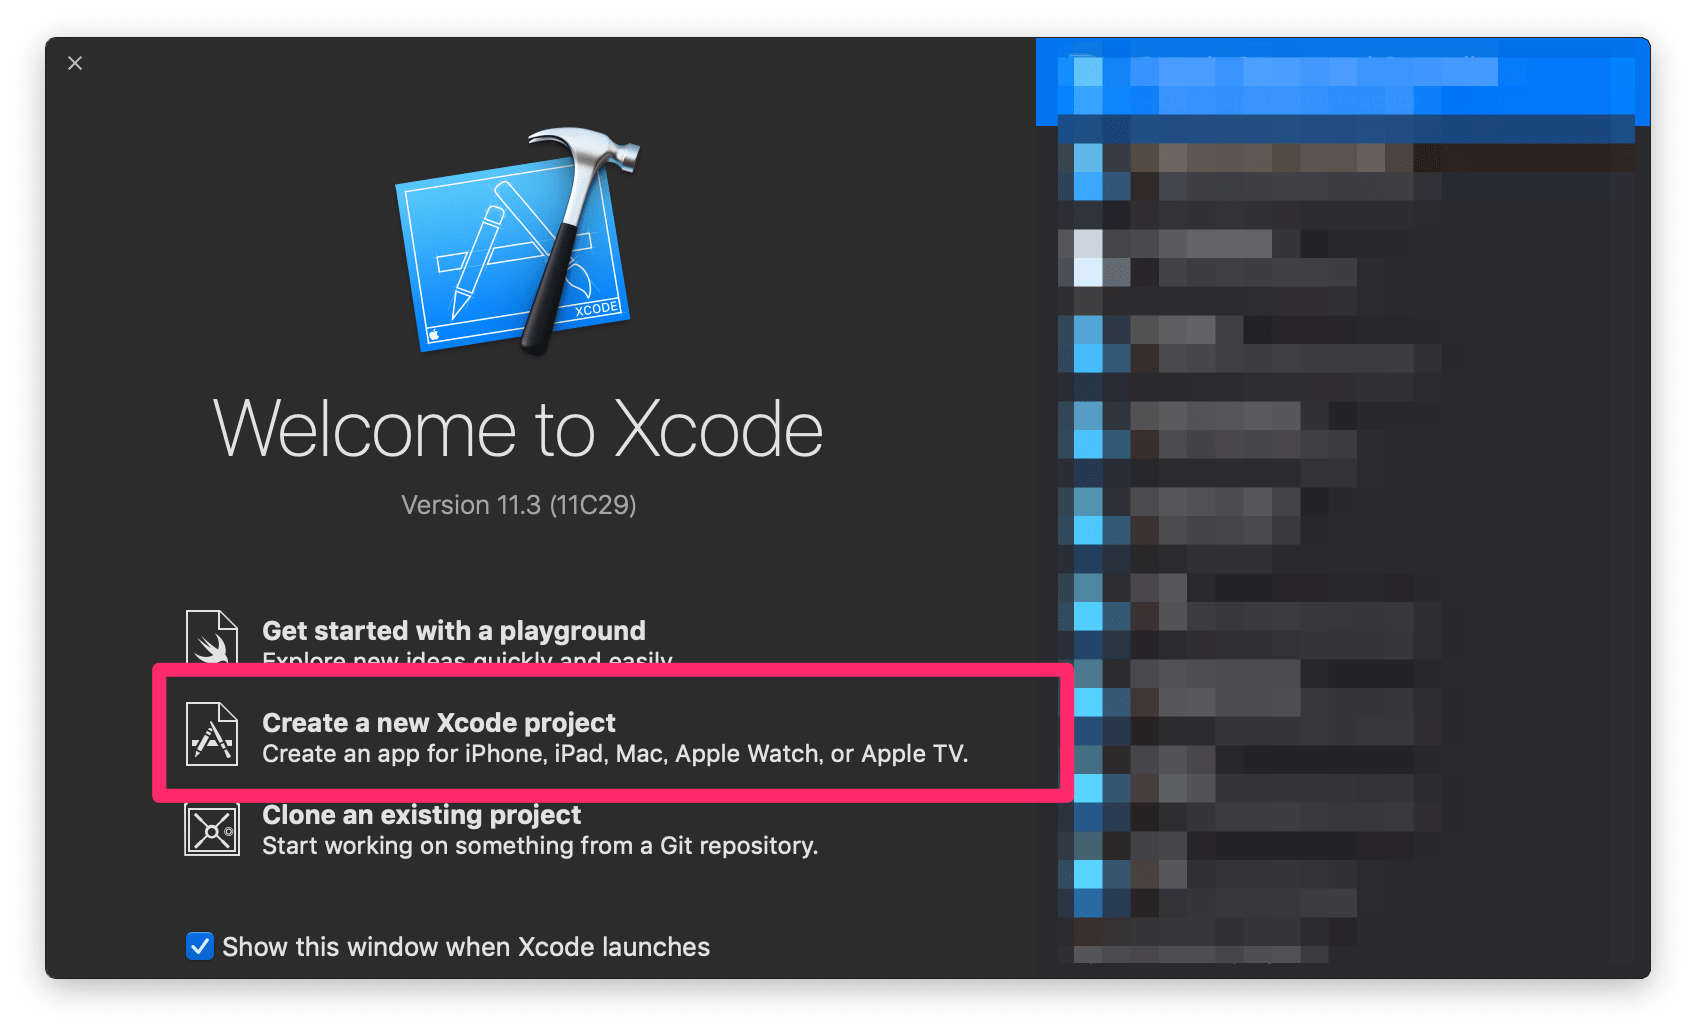 Create a new Xcode project